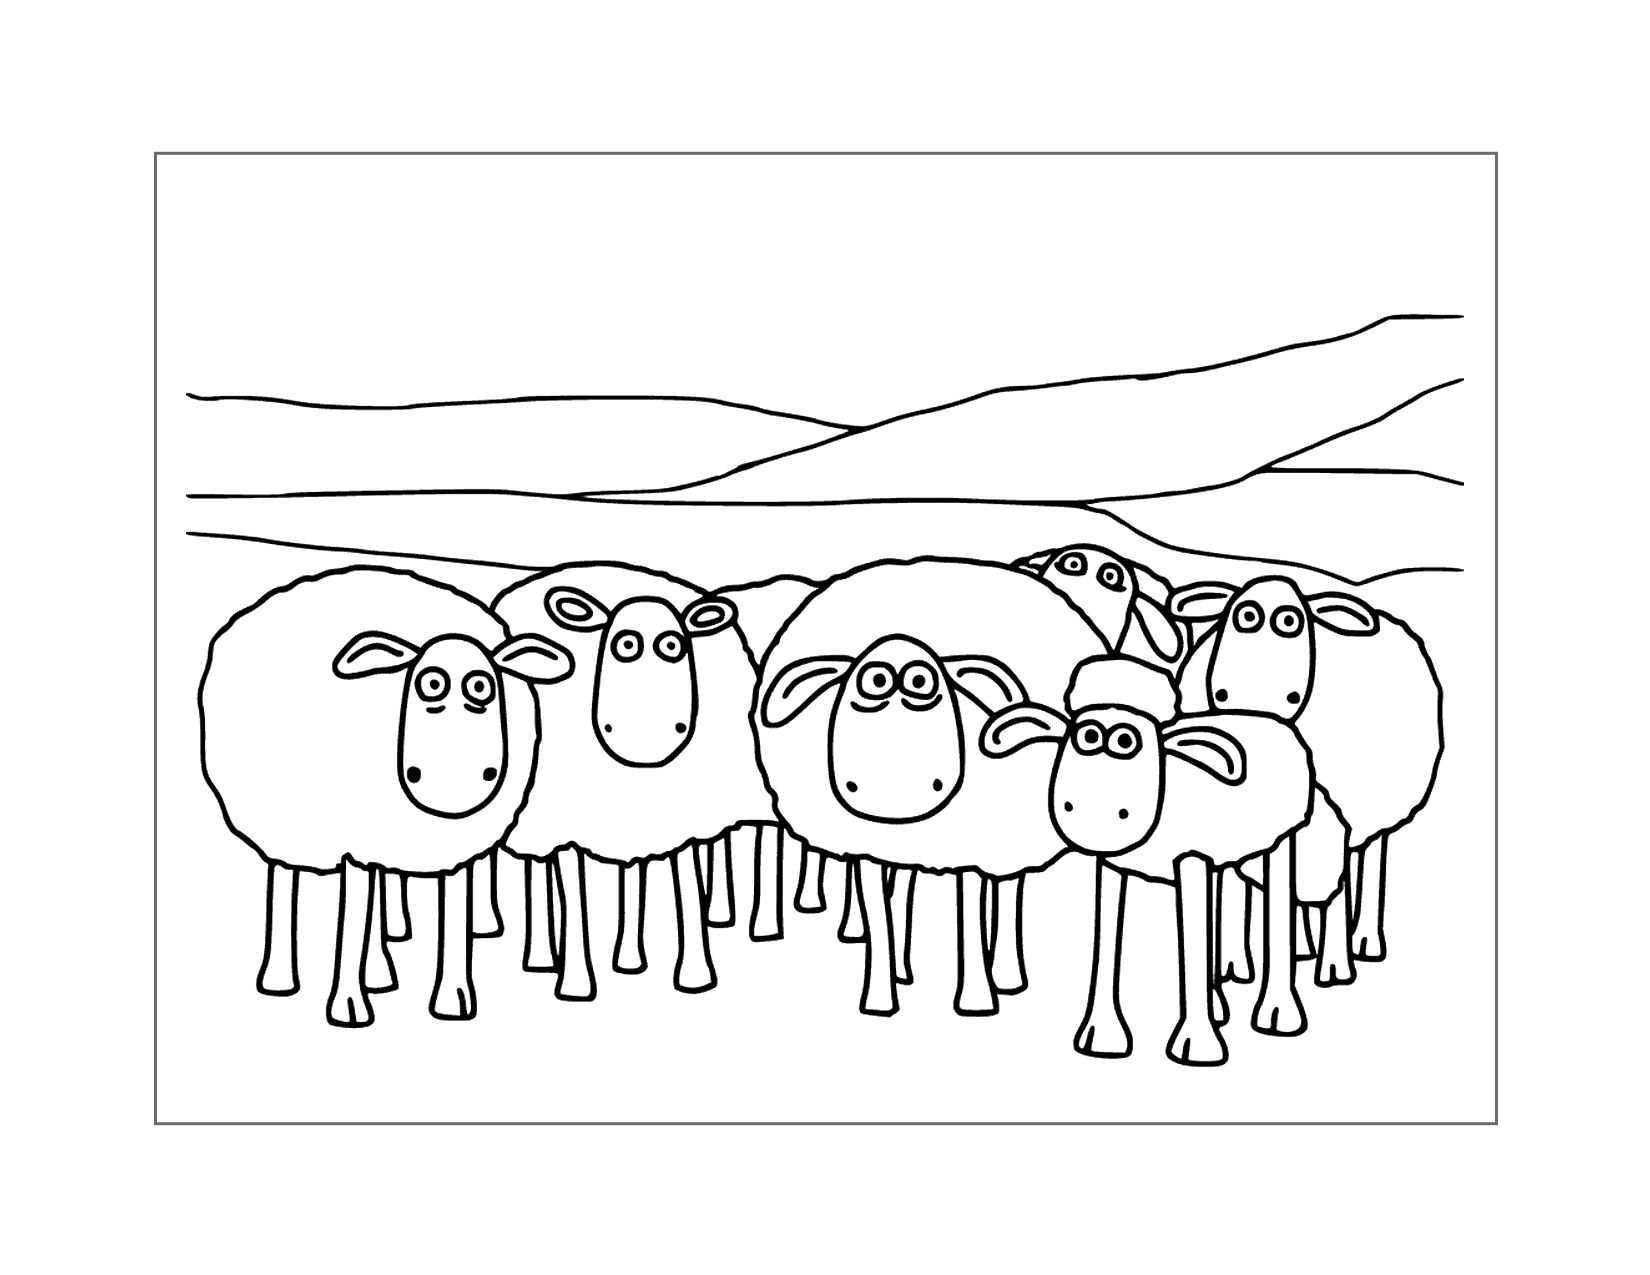 Flock Of Shawn The Sheep Coloring Page